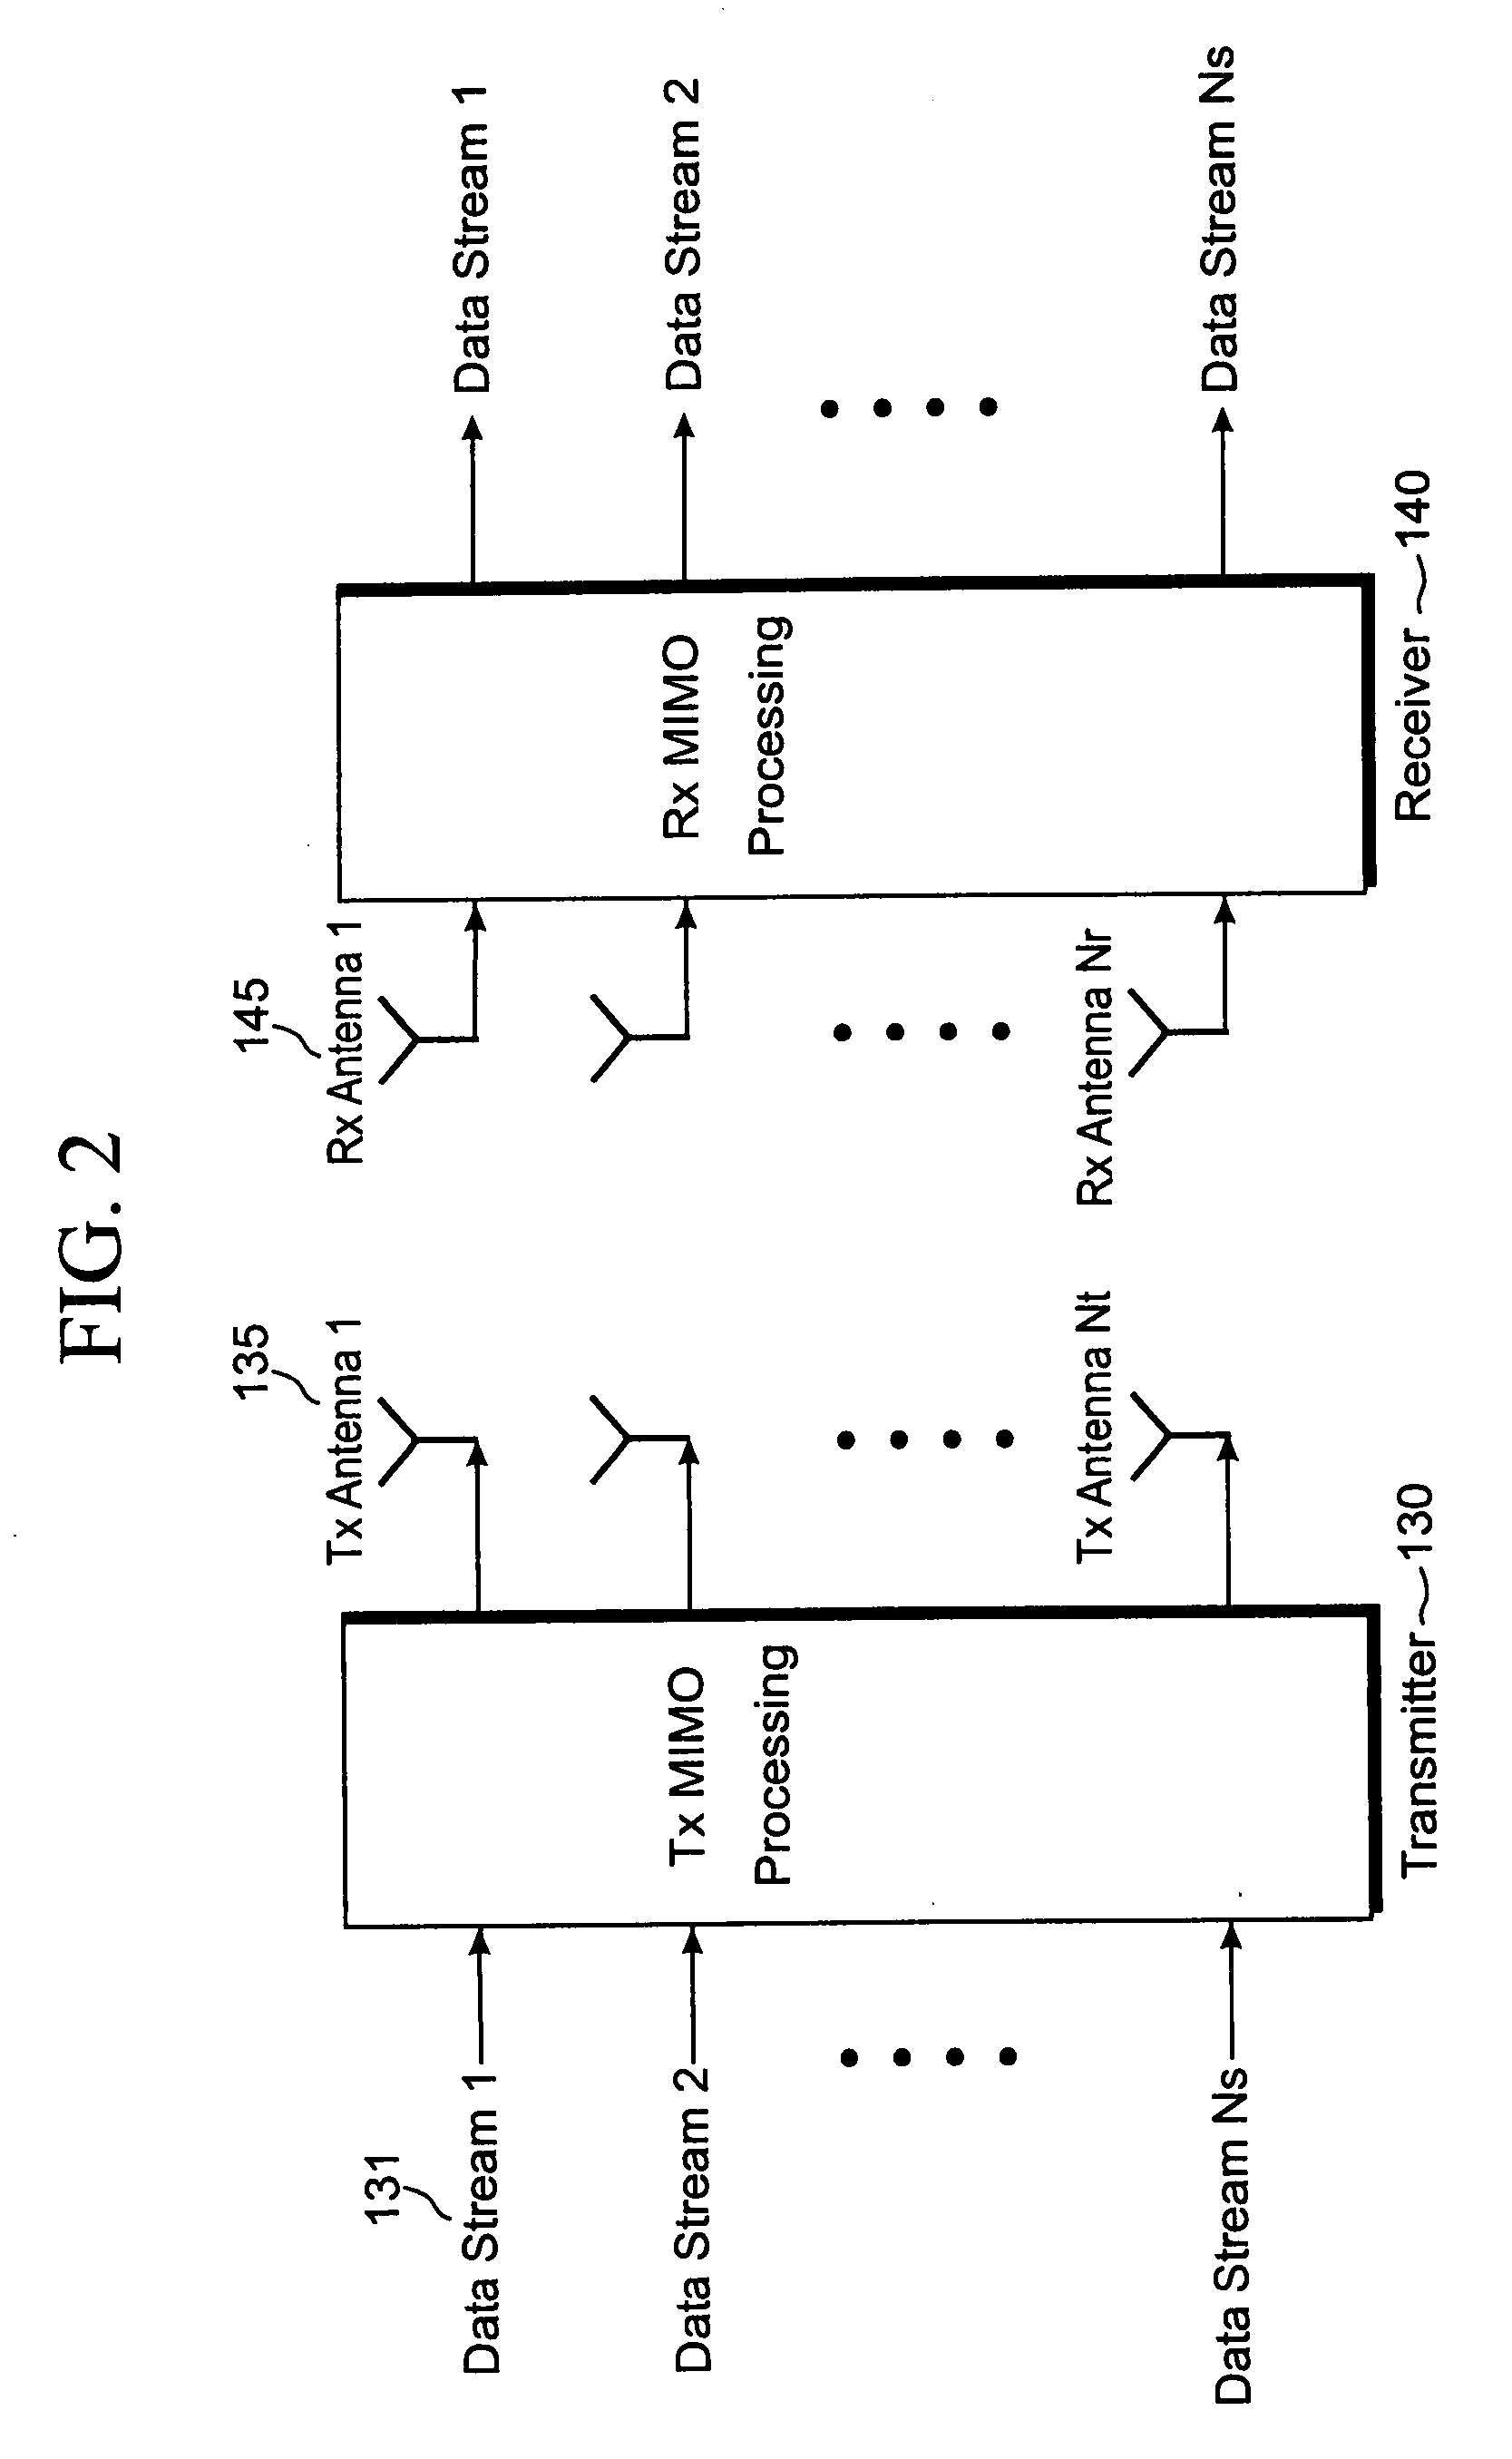 MIMO control signaling in a wireless communication system